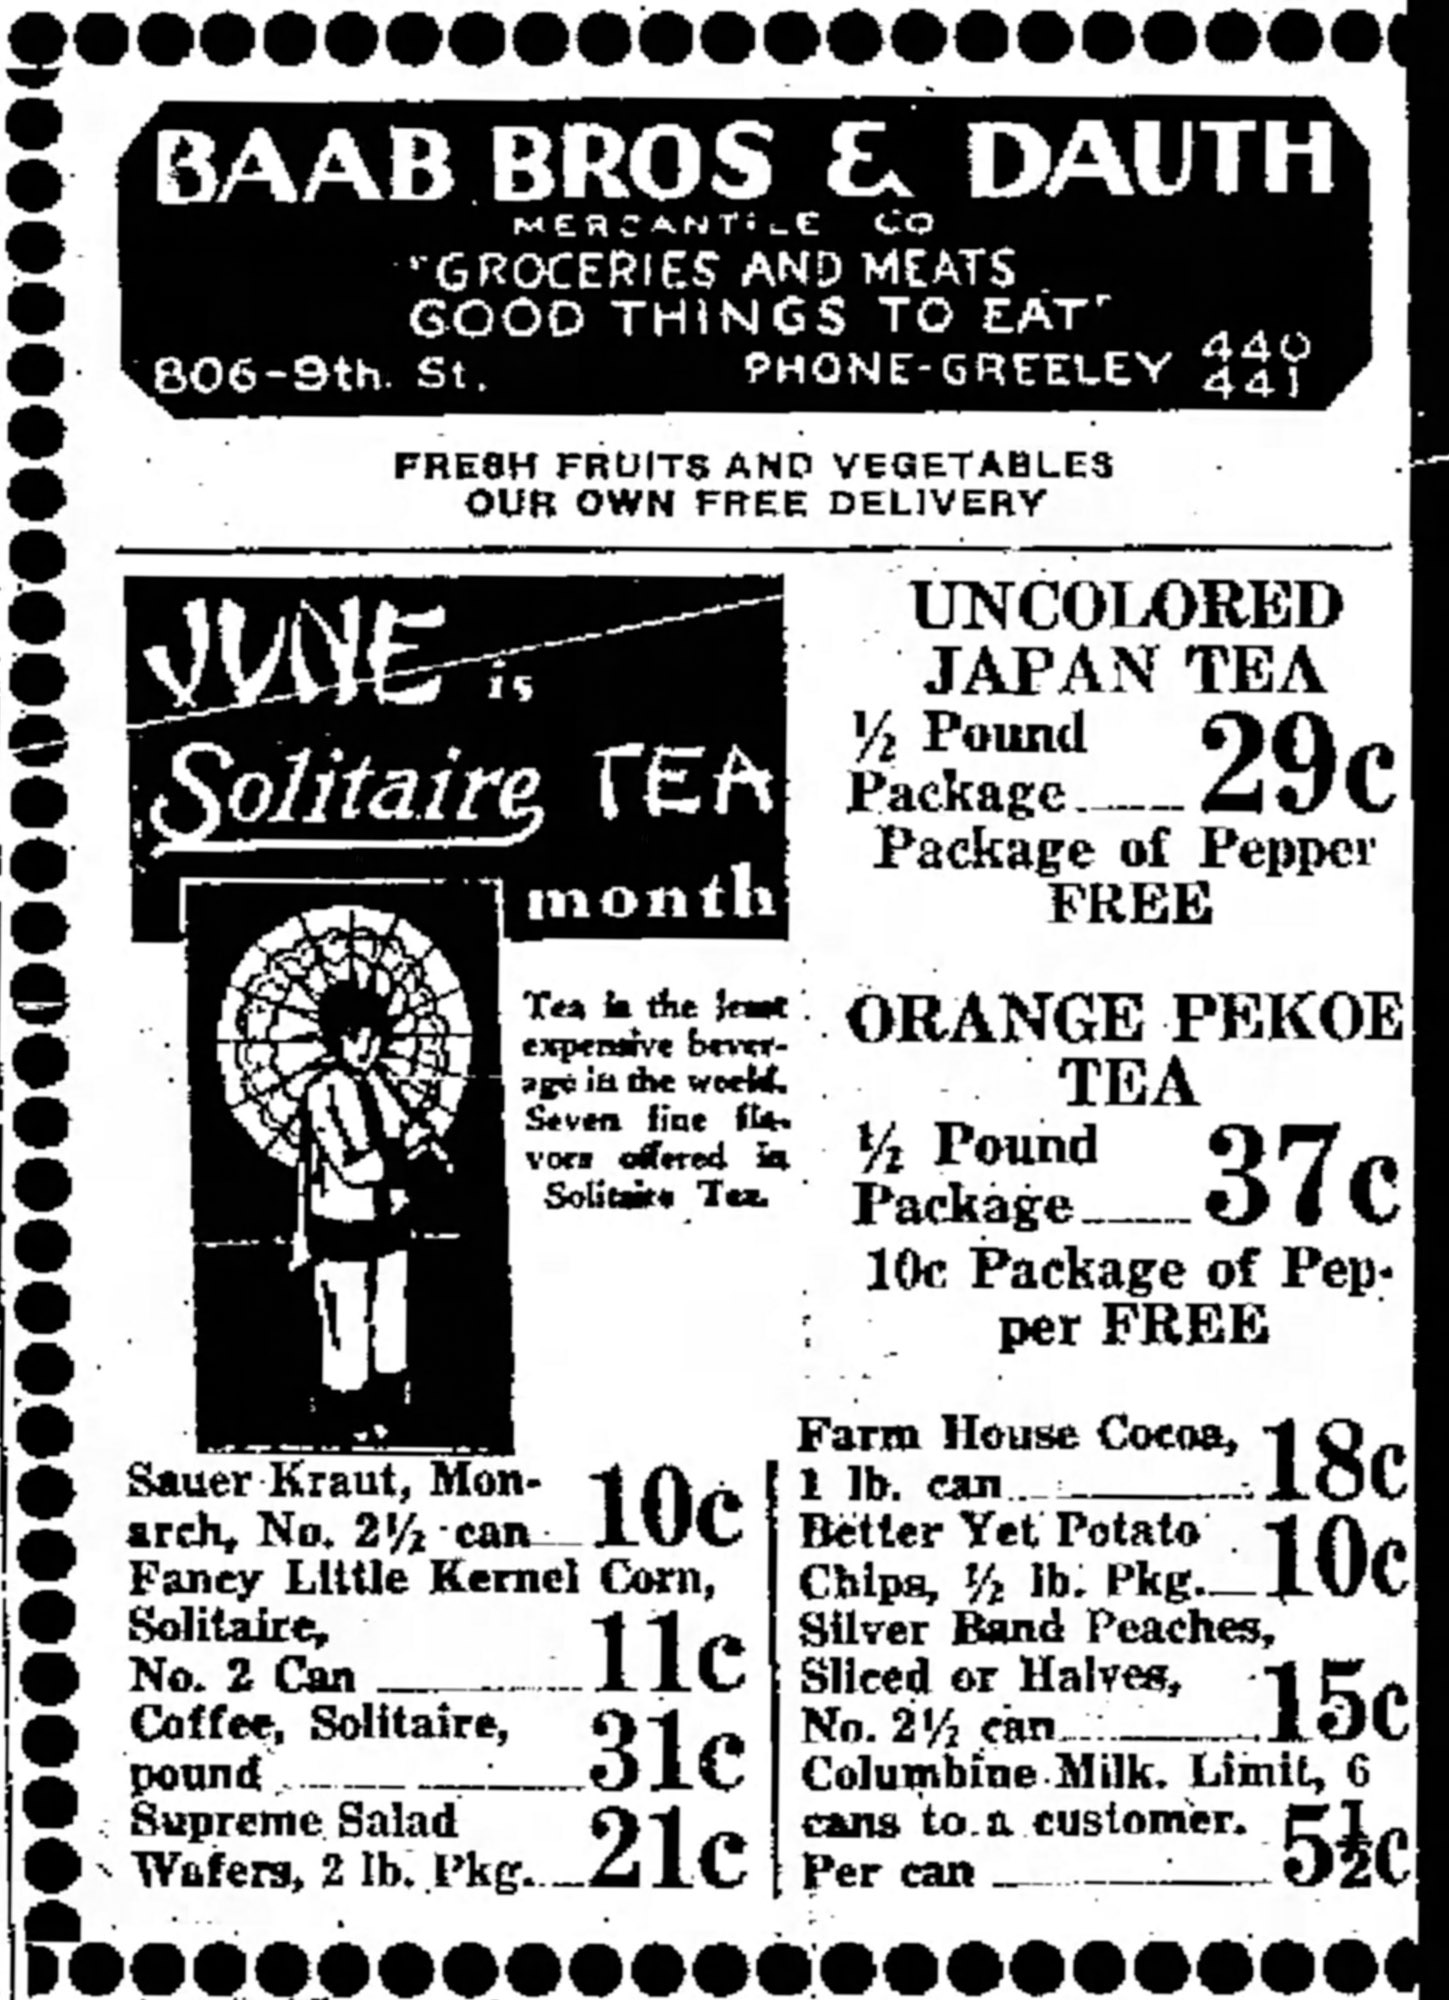 Dauth Family Archive - 1933-06-09 - Greeley Daily Tribune - Baab Bros and Dauth Advertisement